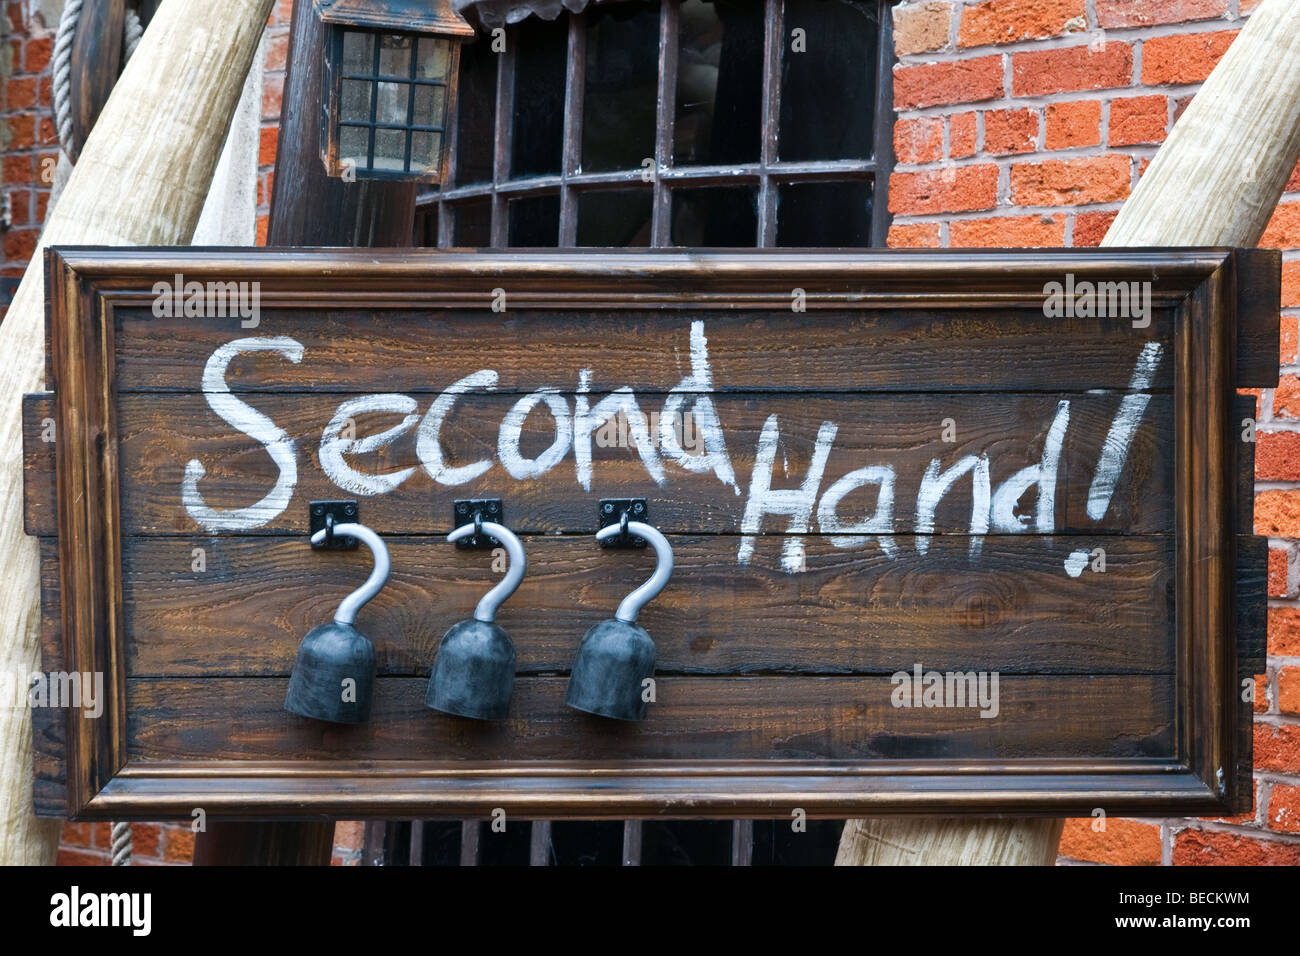 Secondhand sign, picture taken at Alton Towers Stock Photo